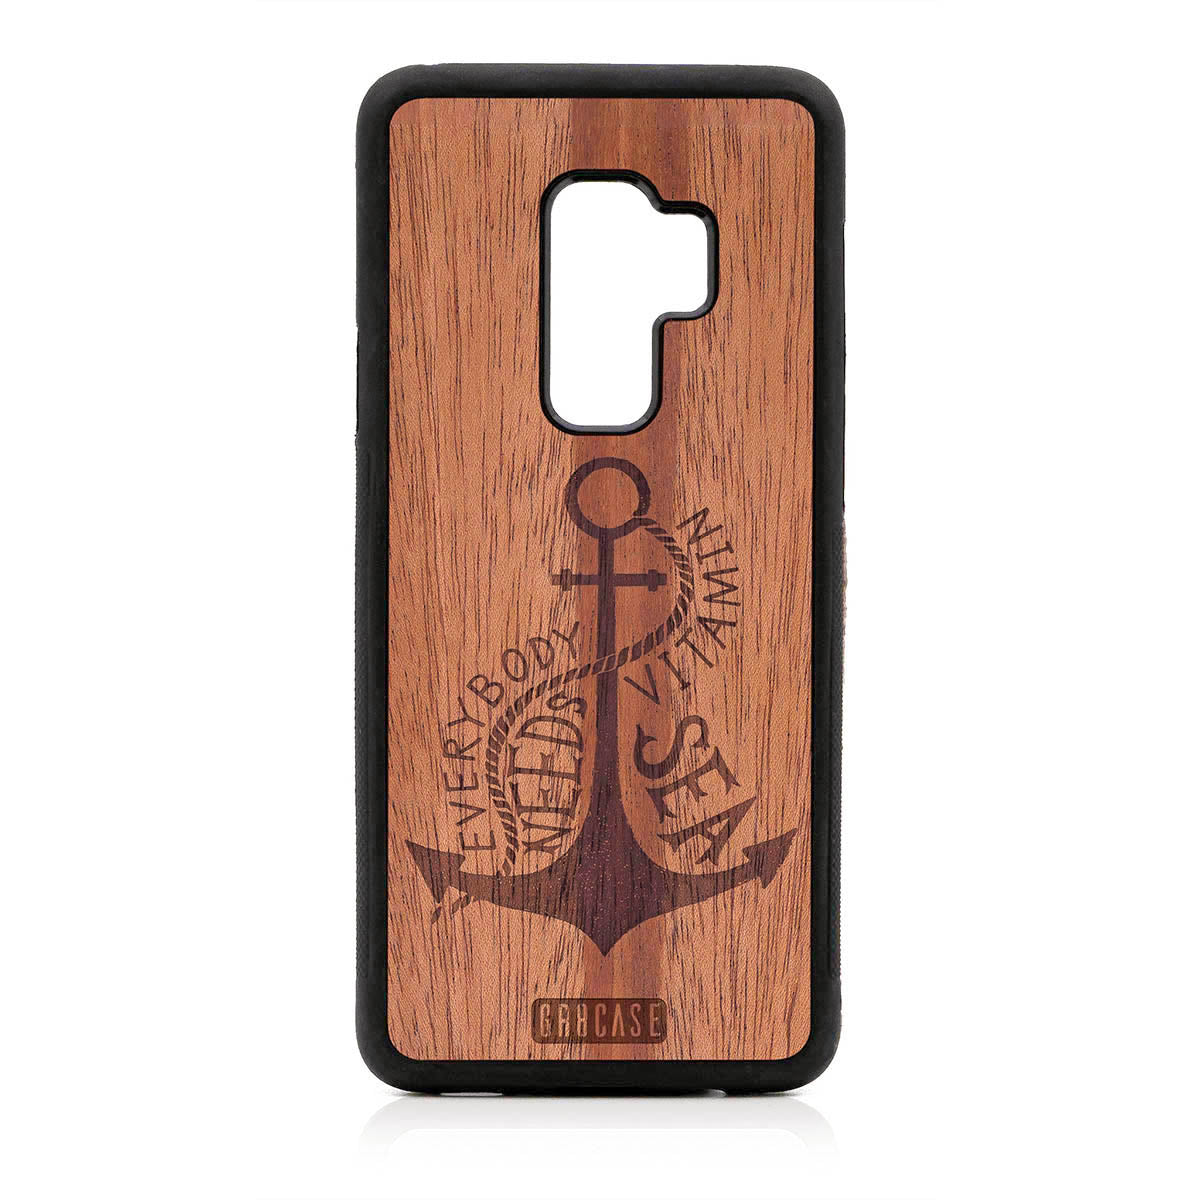 Everybody Needs Vitamin Sea (Anchor) Design Wood Case For Samsung Galaxy S9 Plus by GR8CASE